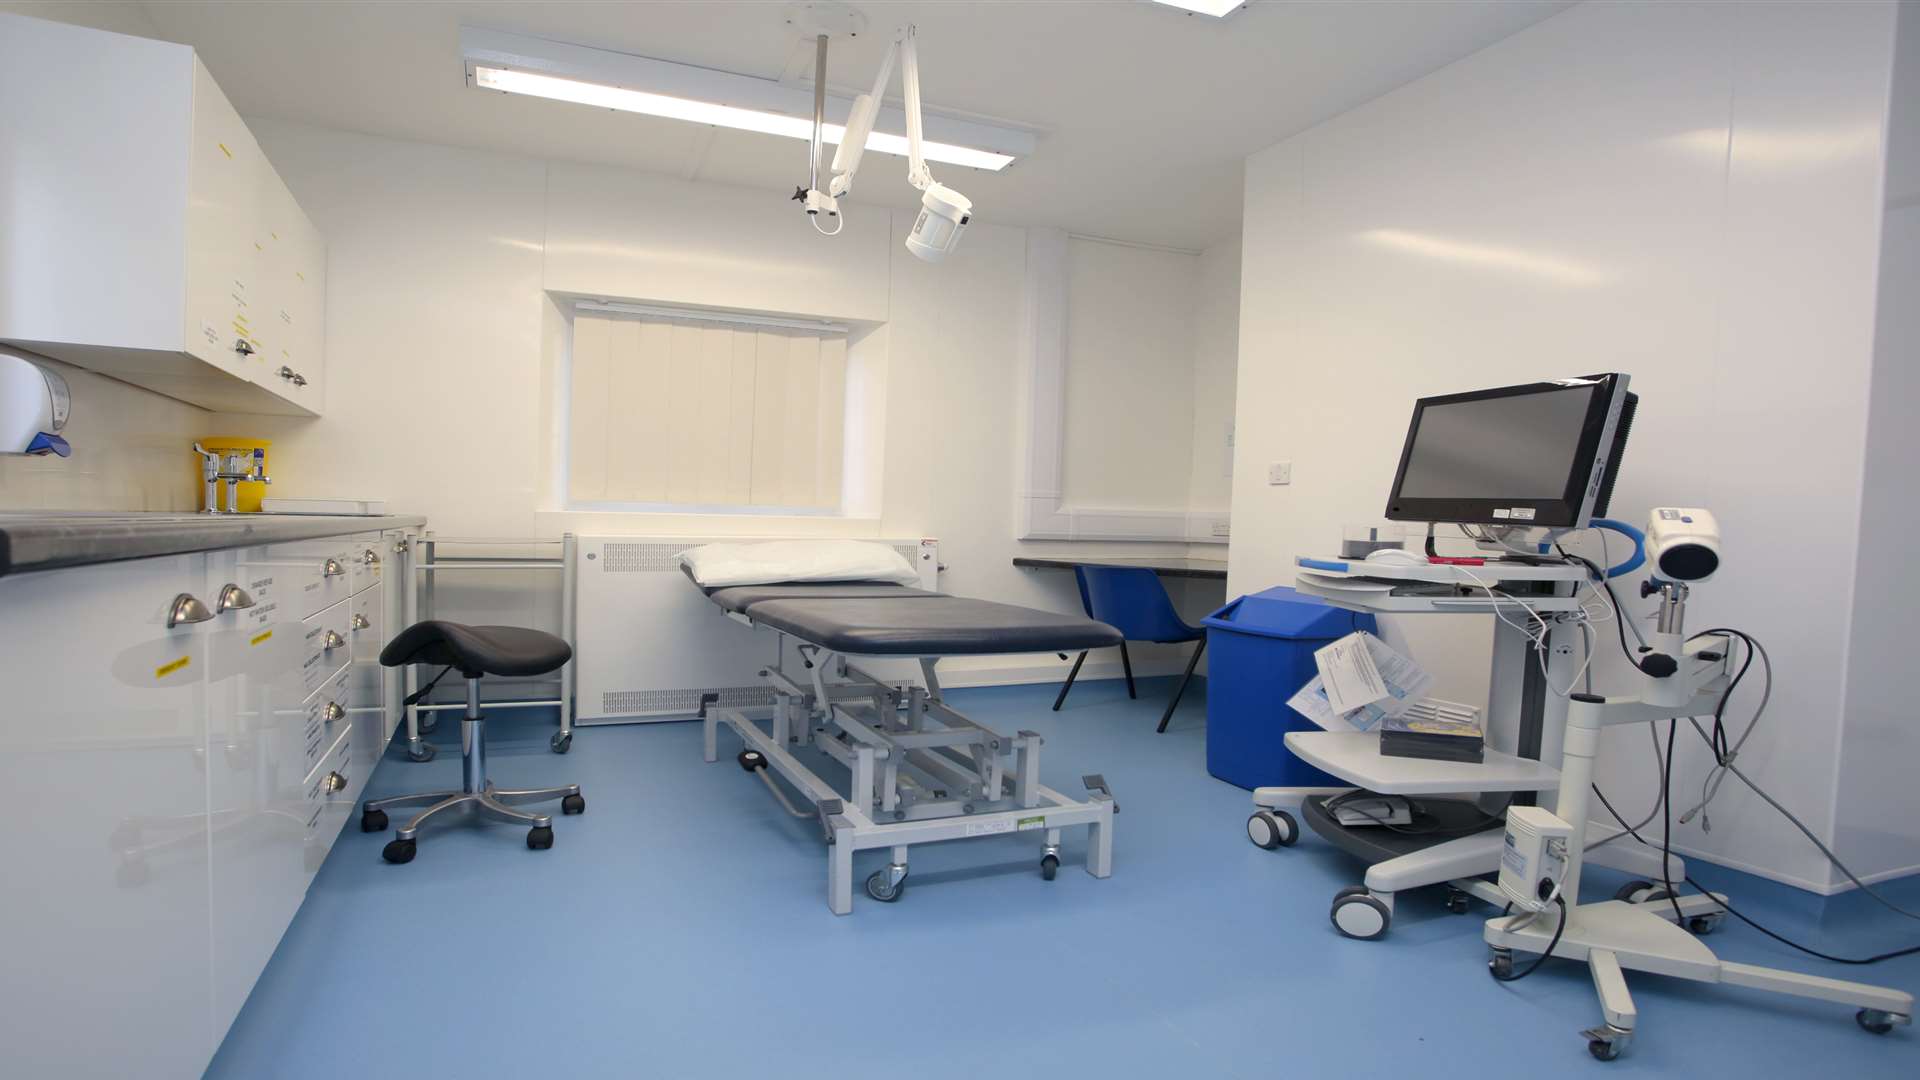 Beech House has two examination rooms where forensic samples can be taken if the client wishes